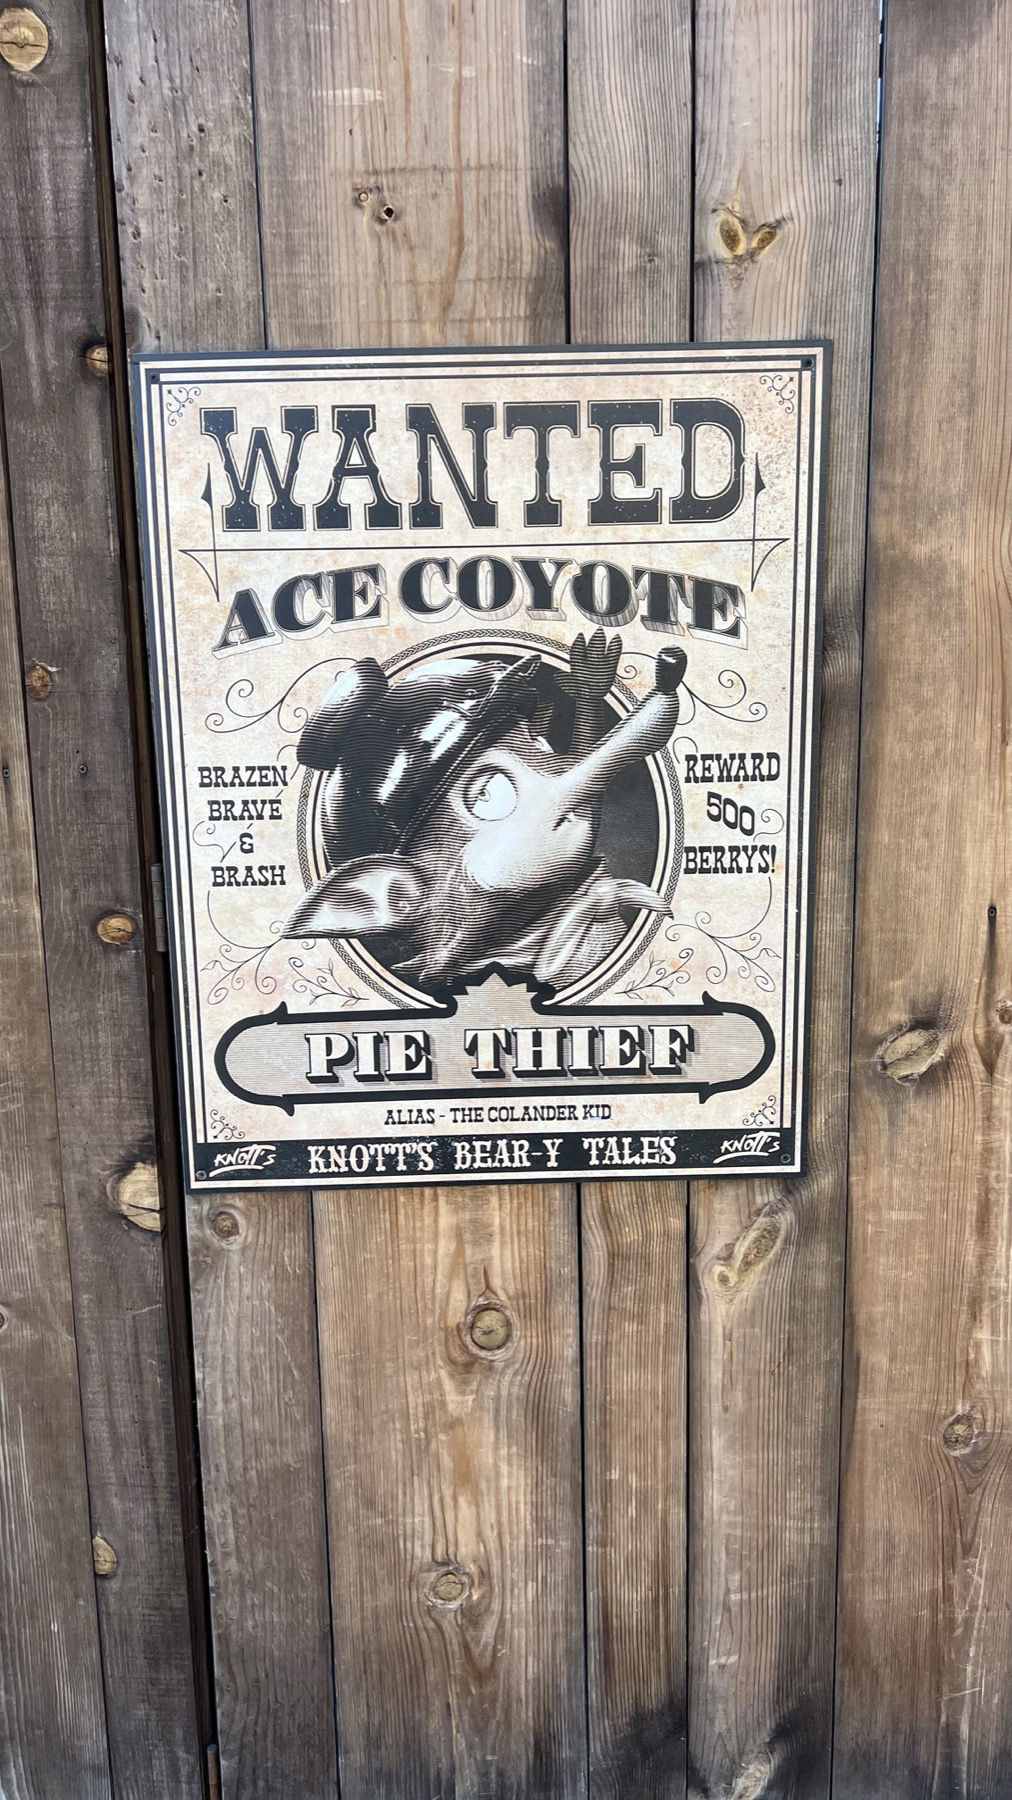 Wanted Ace Coyote